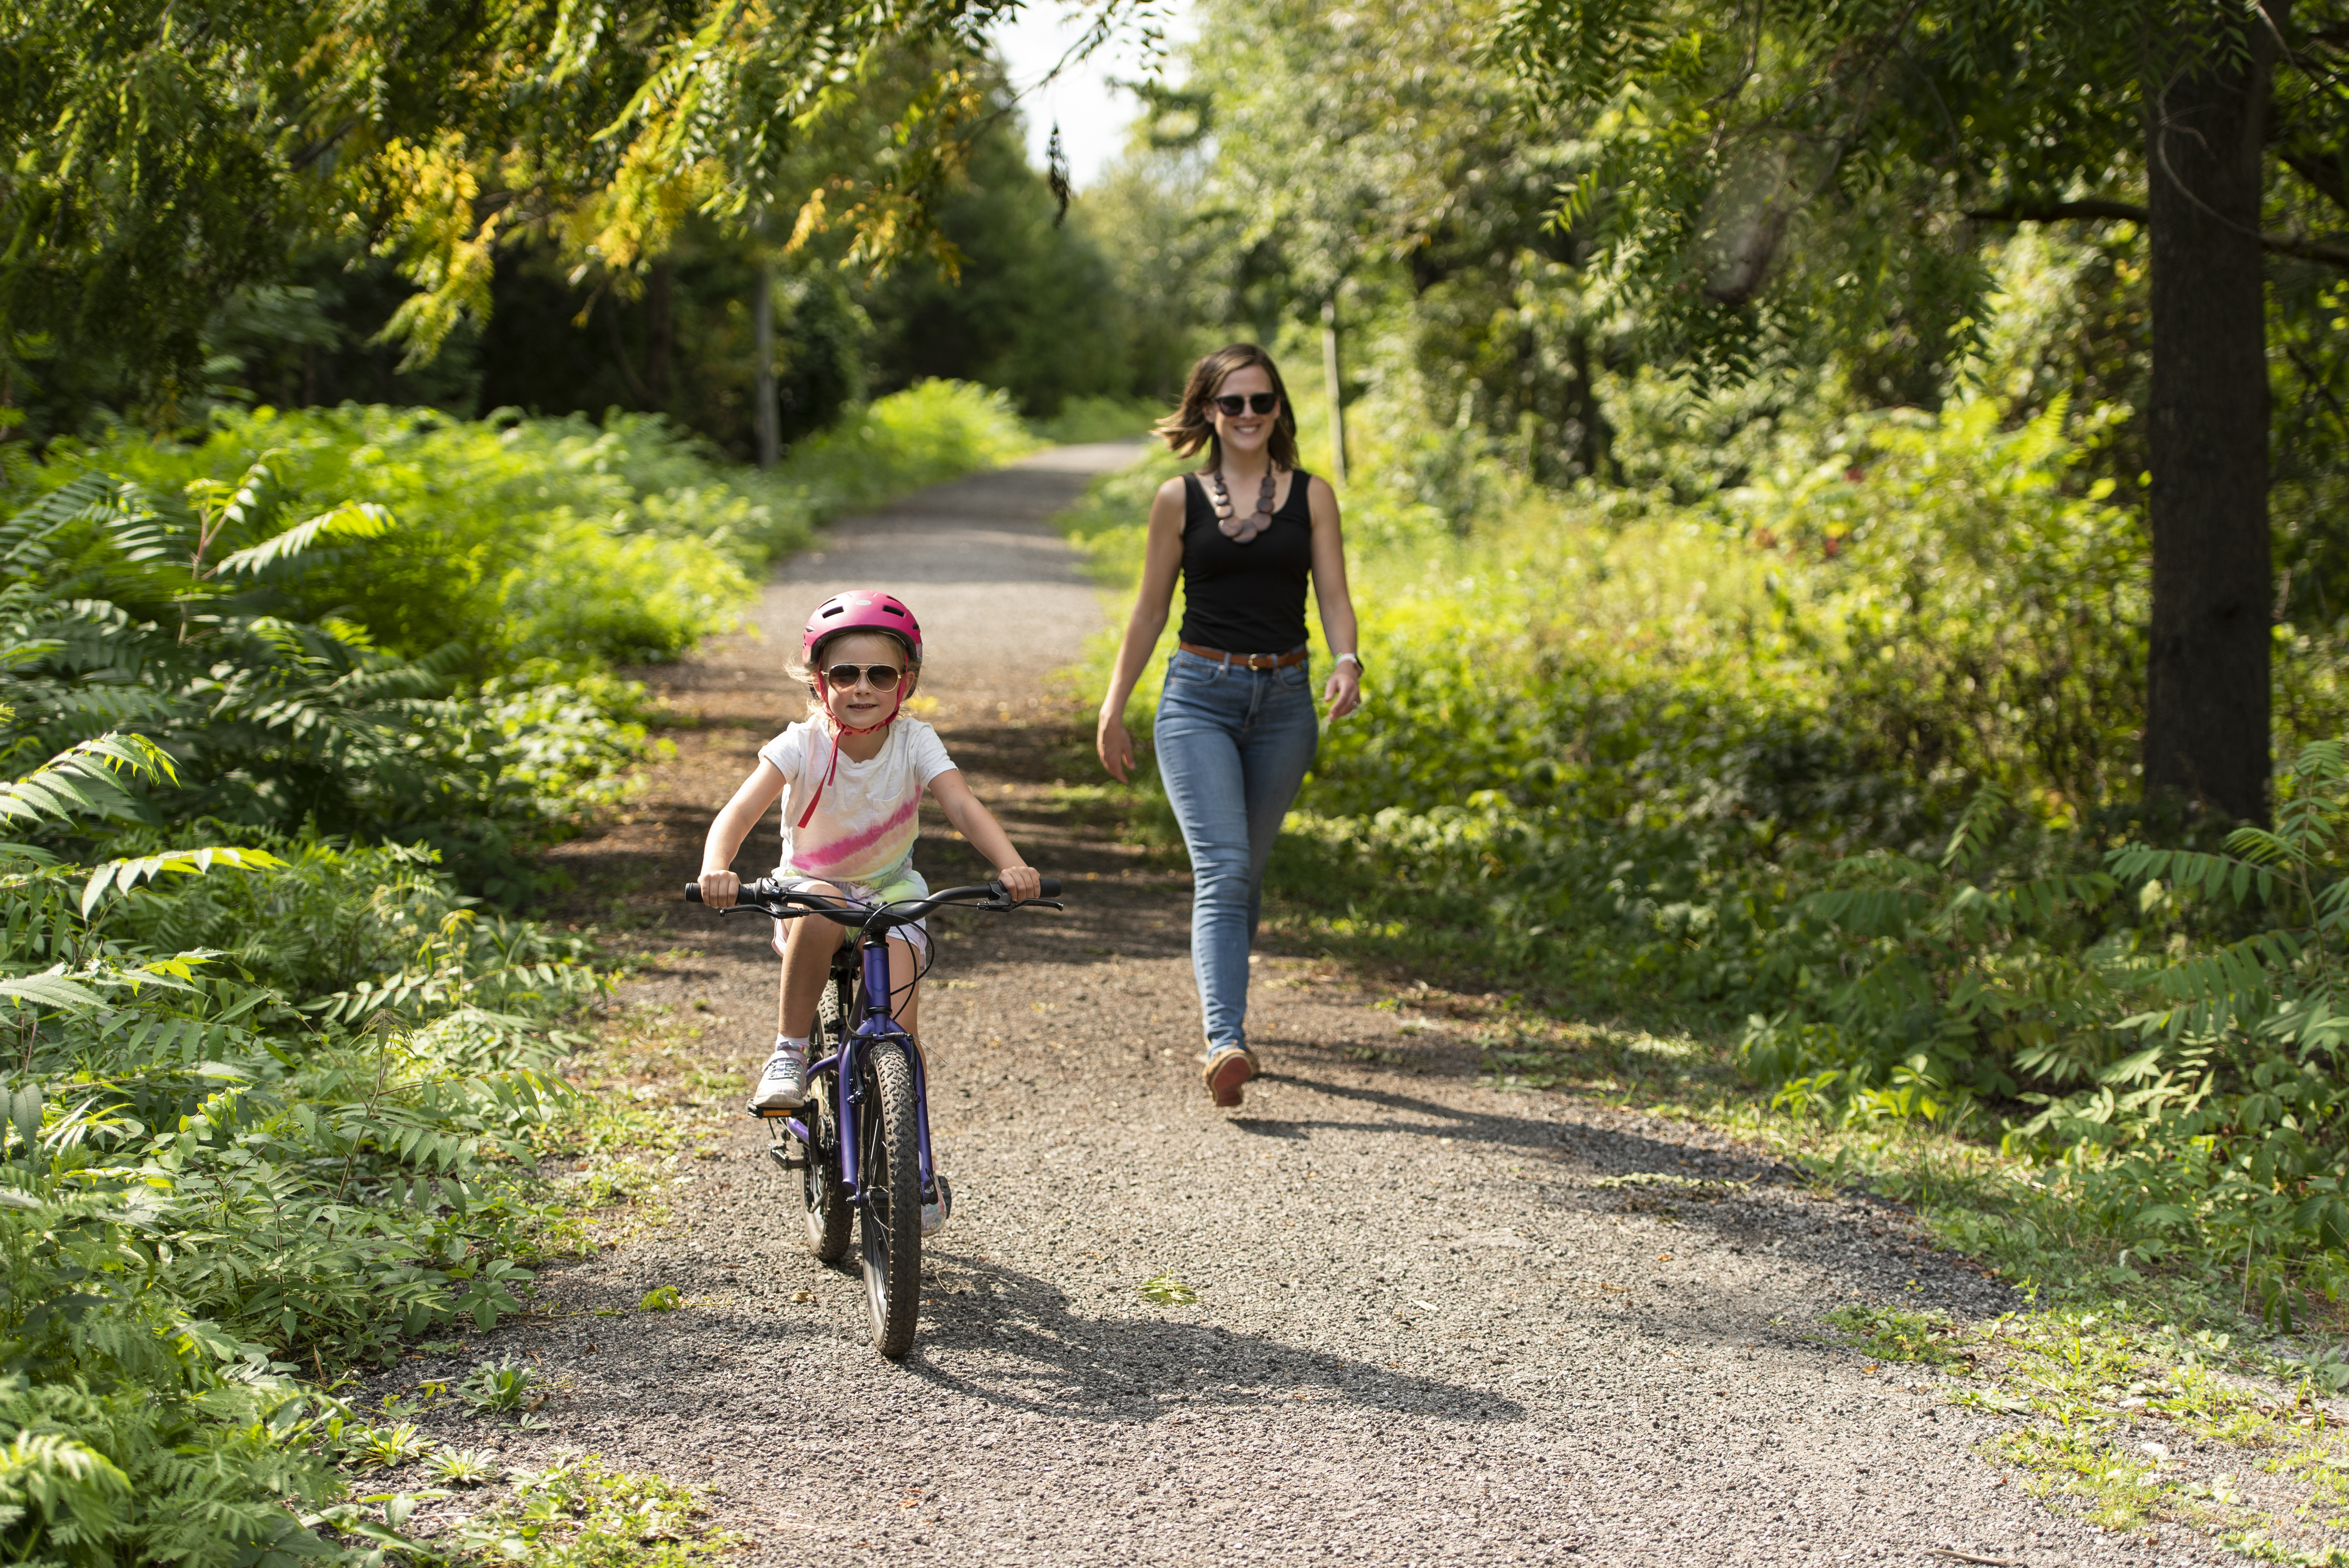 Image of a girl riding her bicycle with a person walking behind her